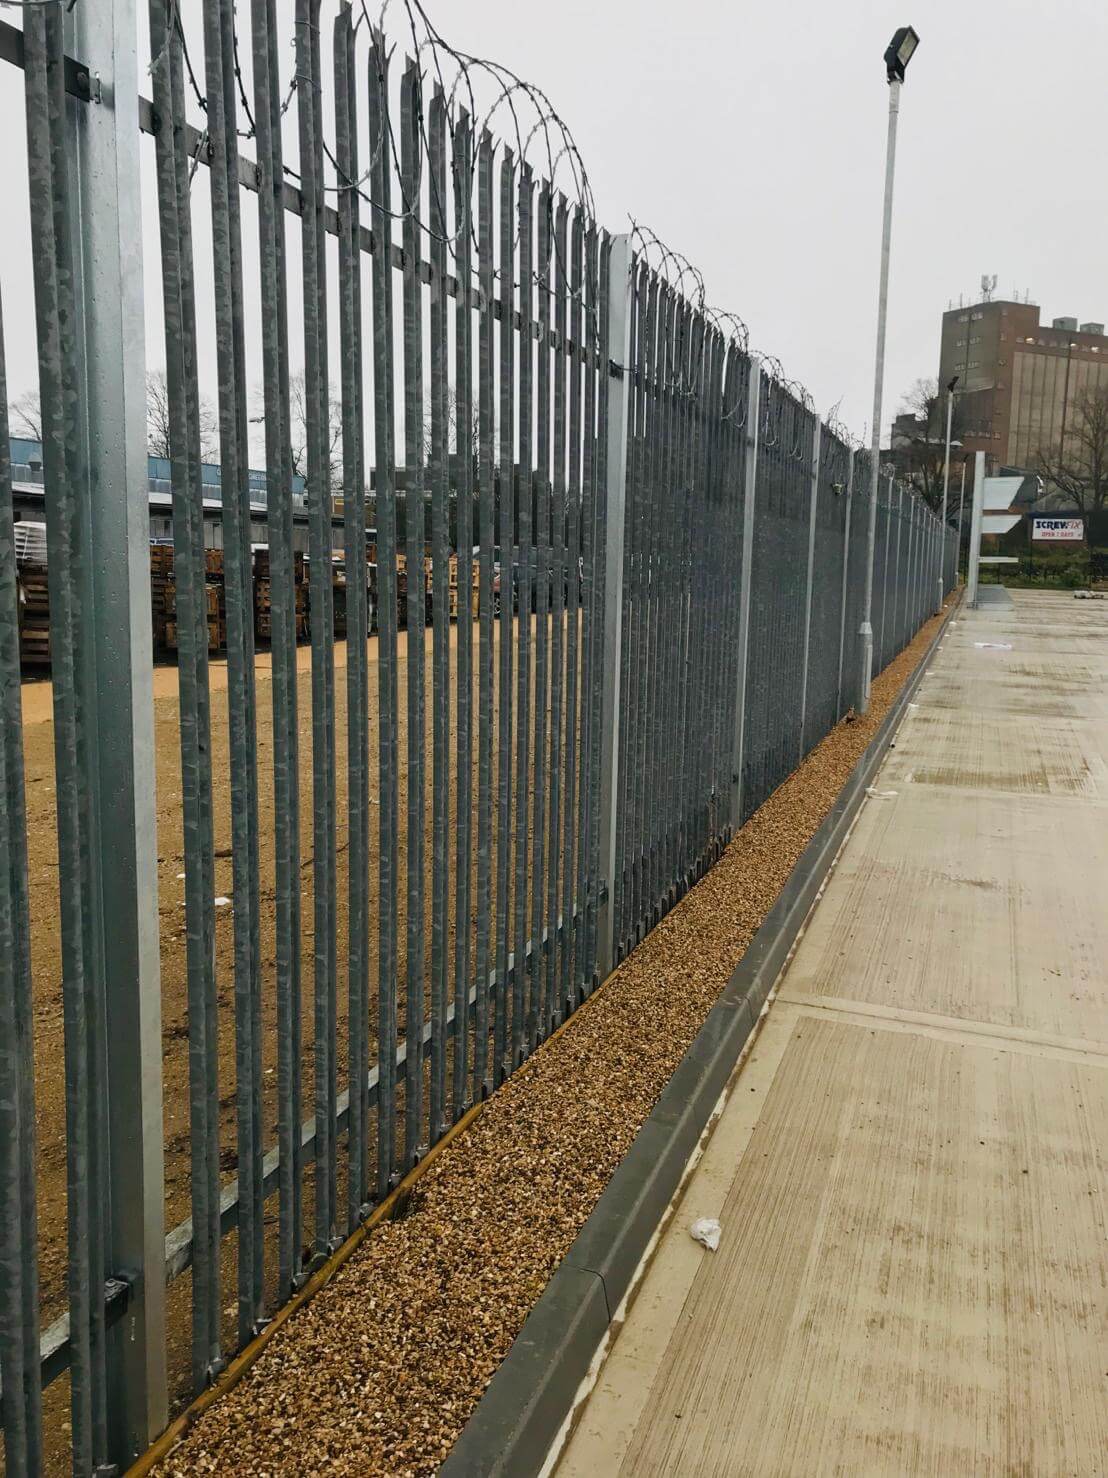 "Ornamental Fencing for Historical Properties"